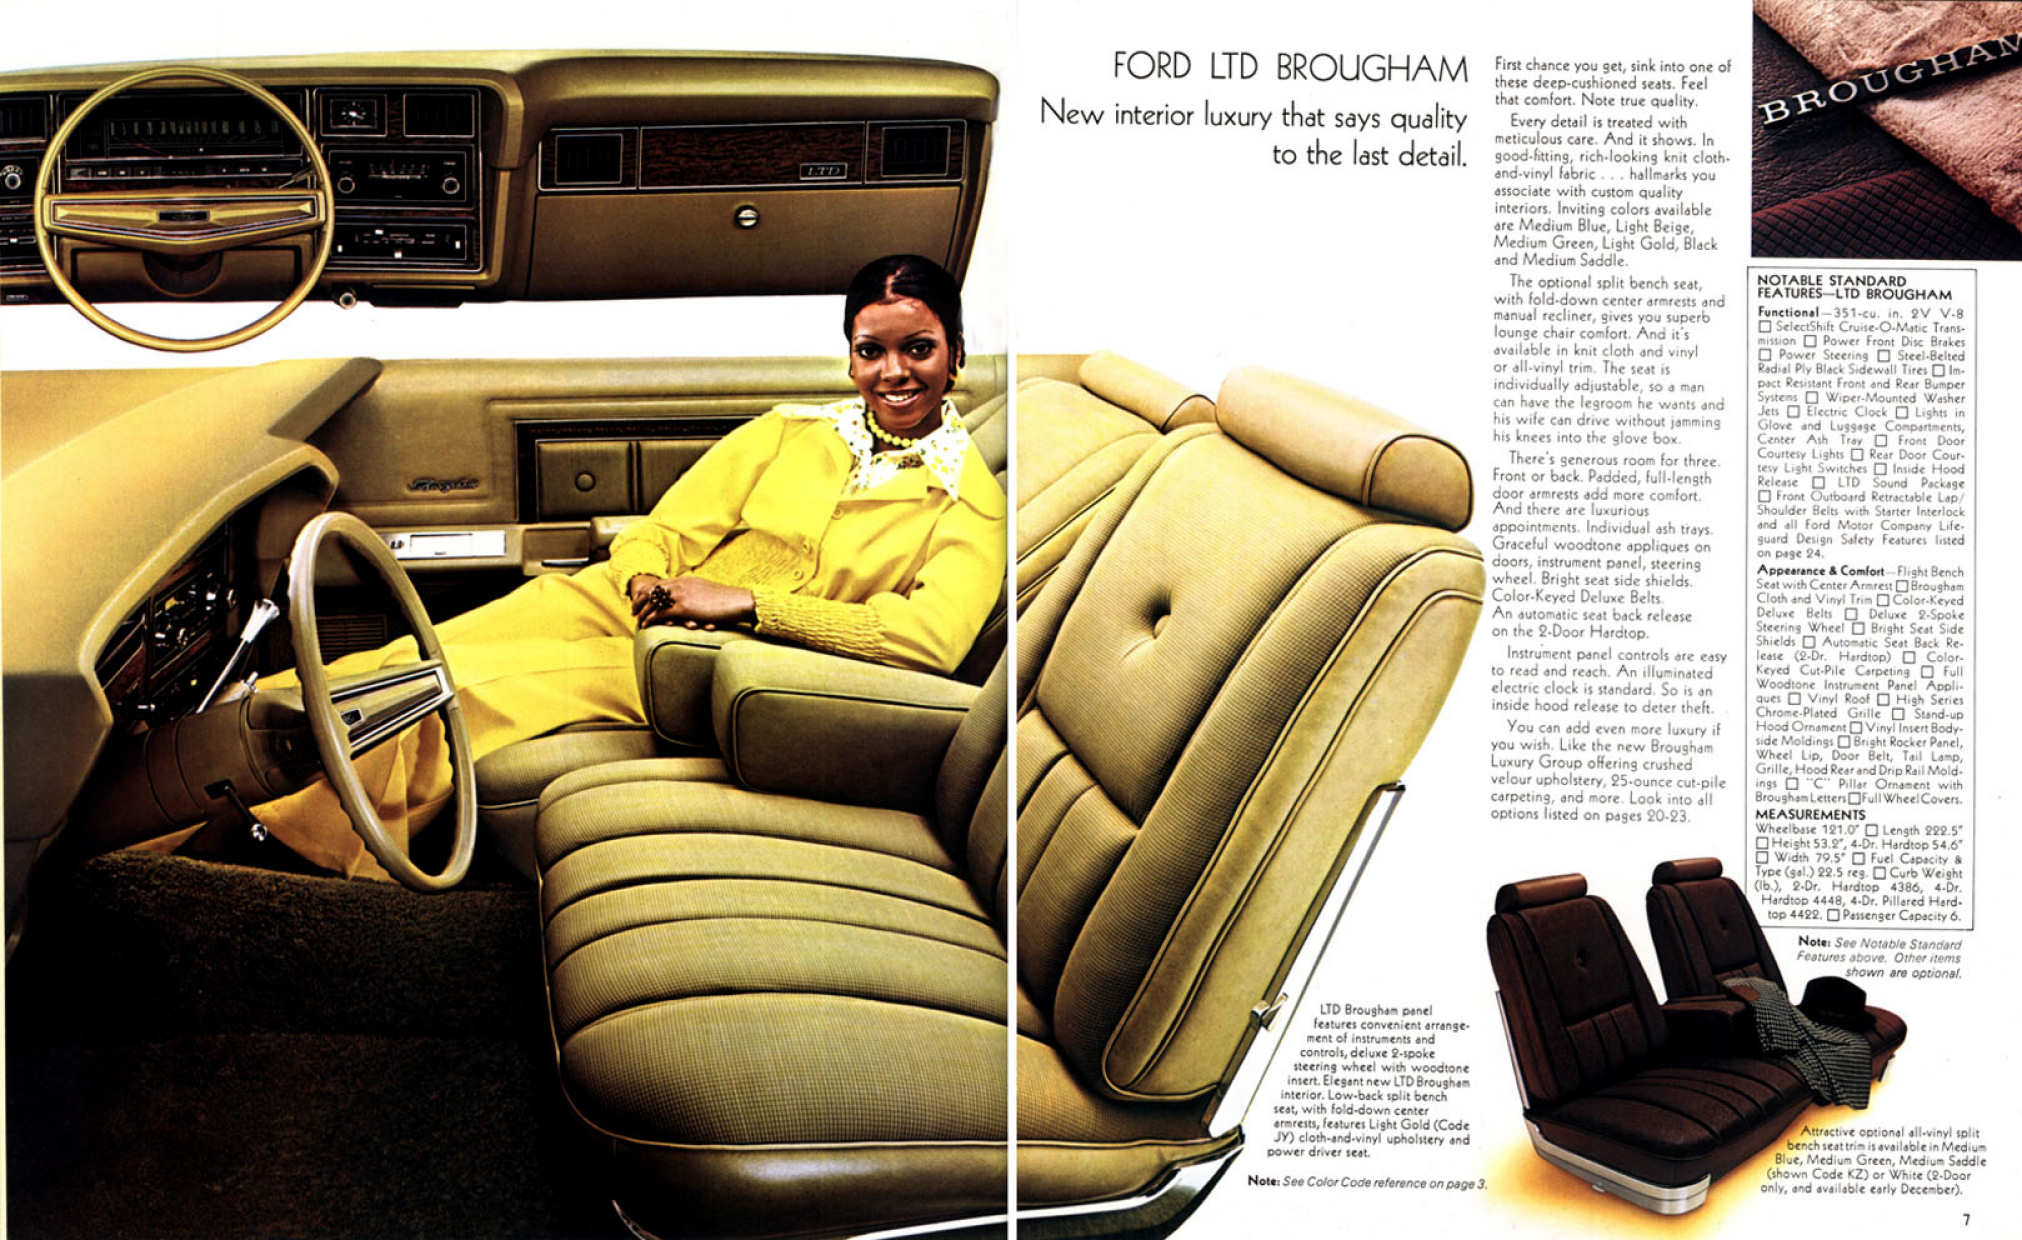 1974_Ford_Full_Size-06-07